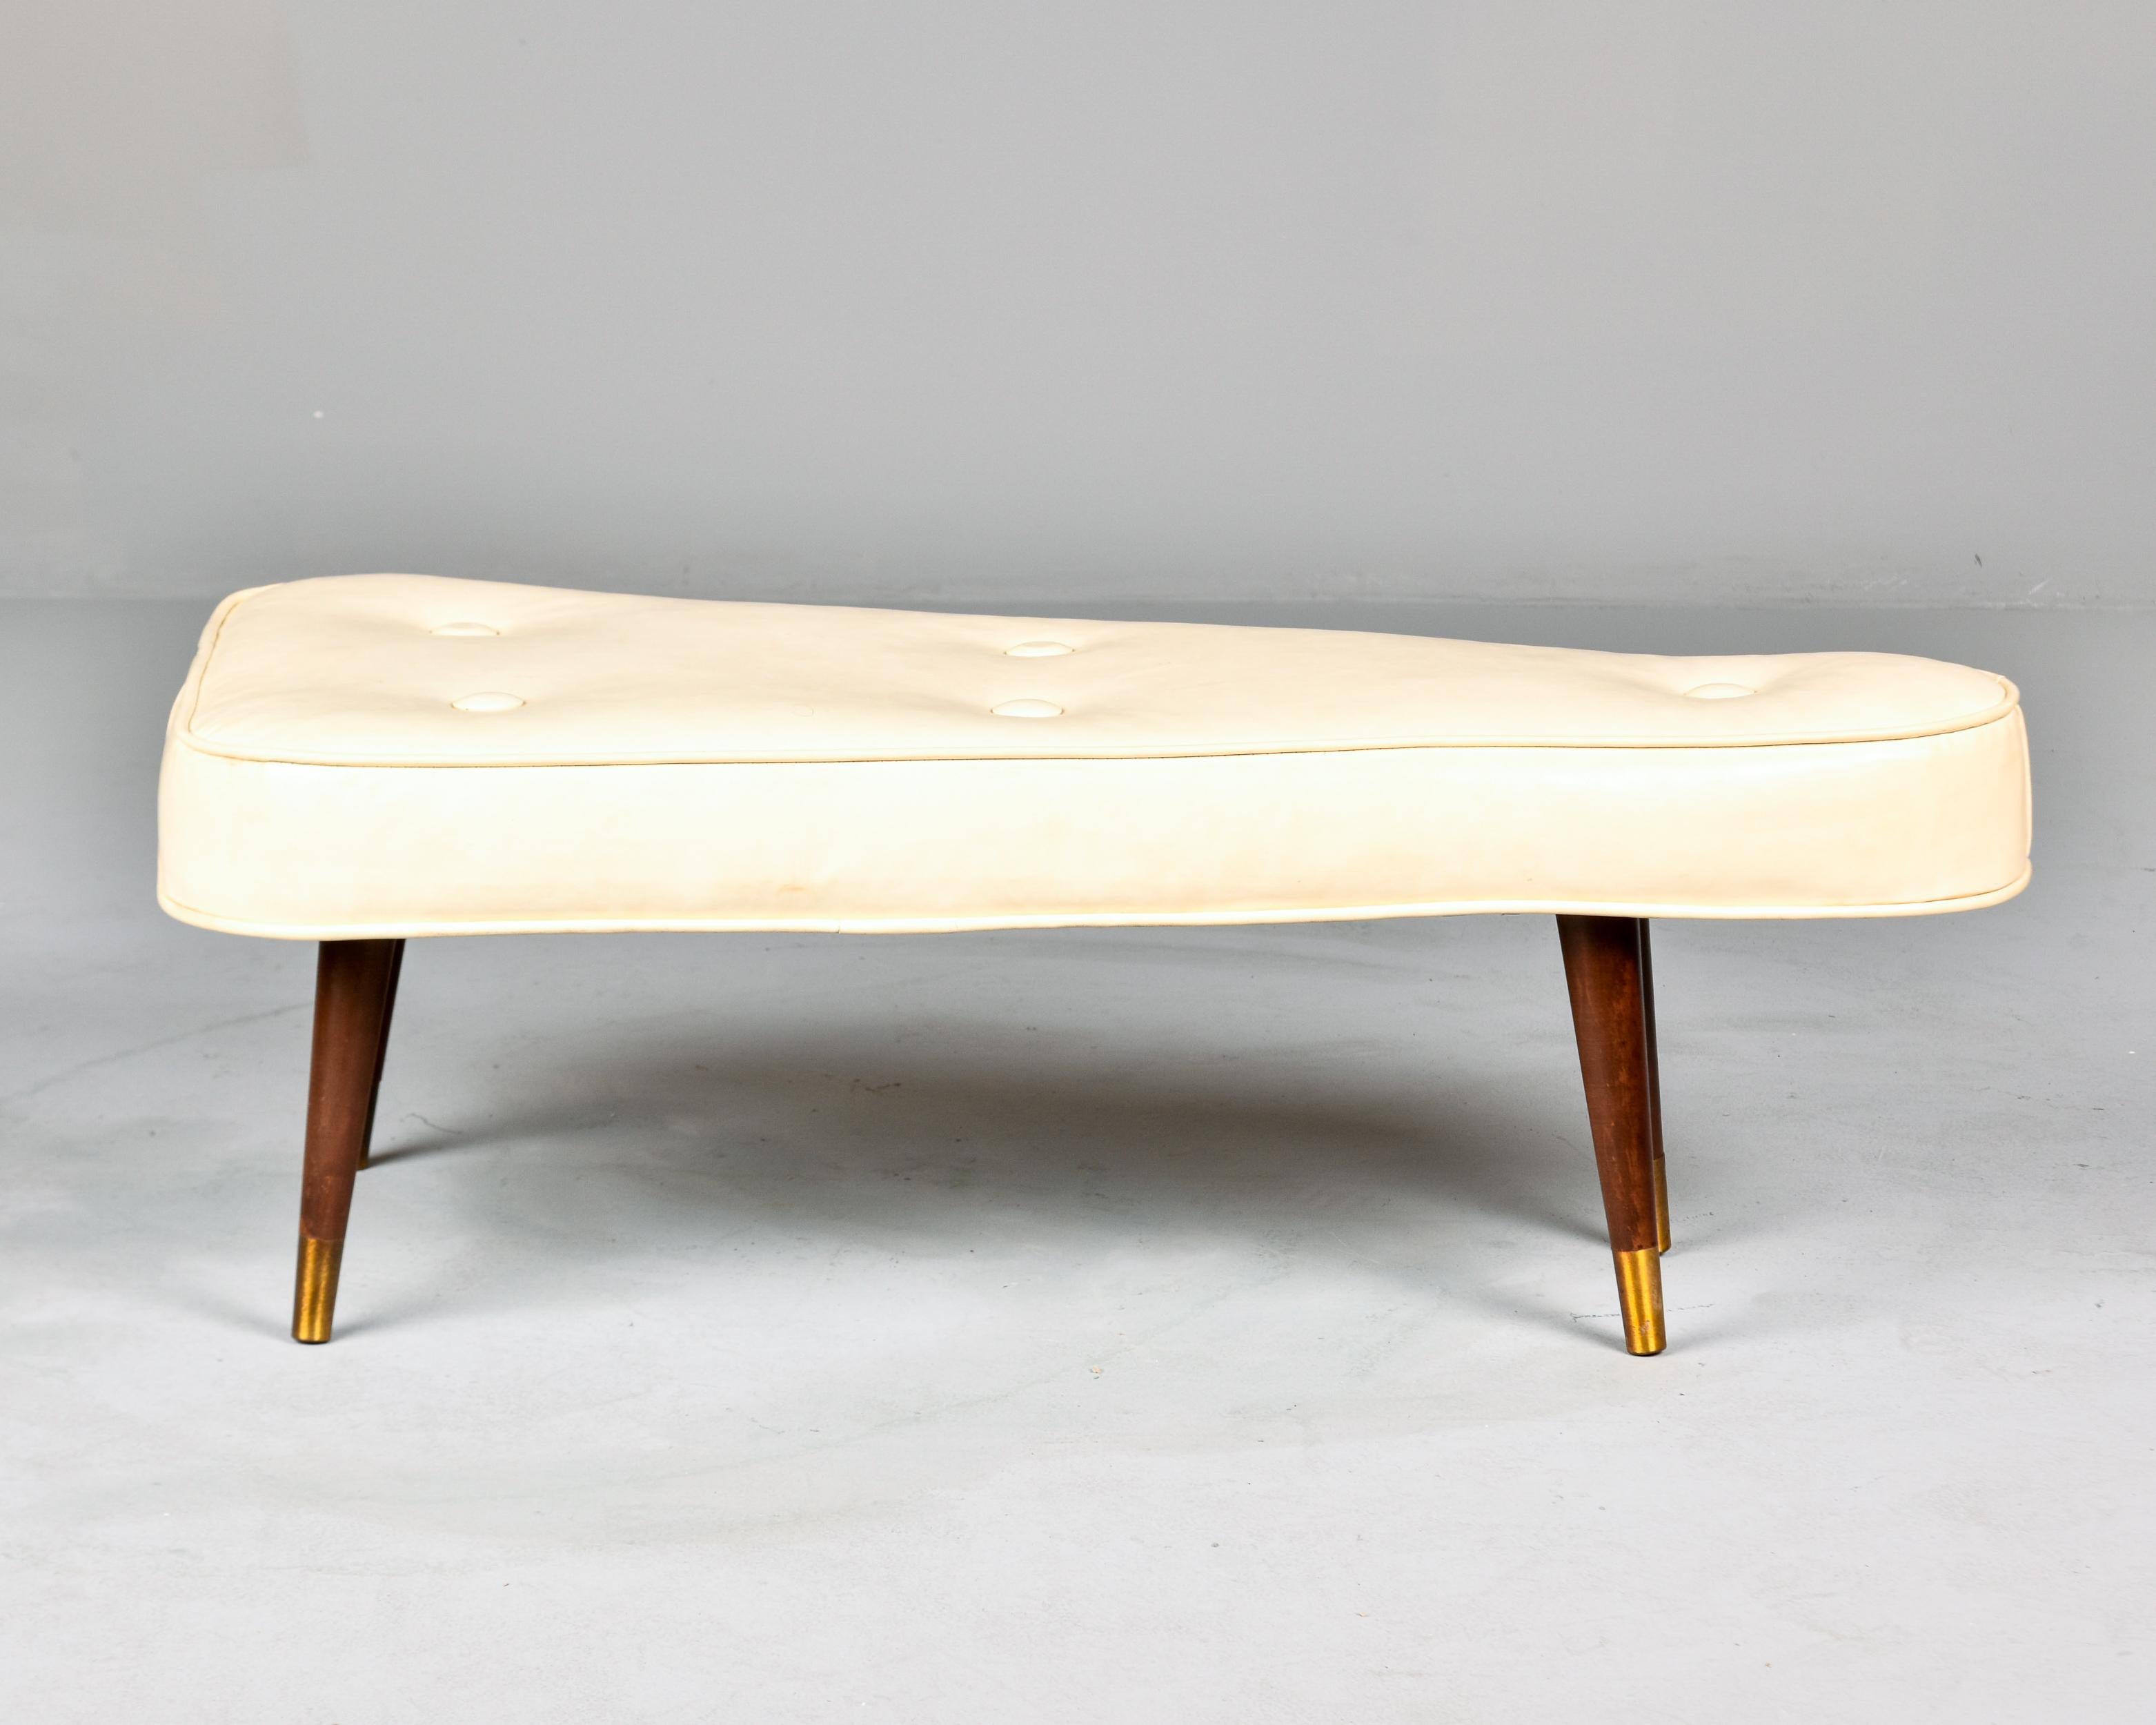 20th Century Mid Century Triangular Atomic Upholstered Stool or Bench with Brass Tipped Legs